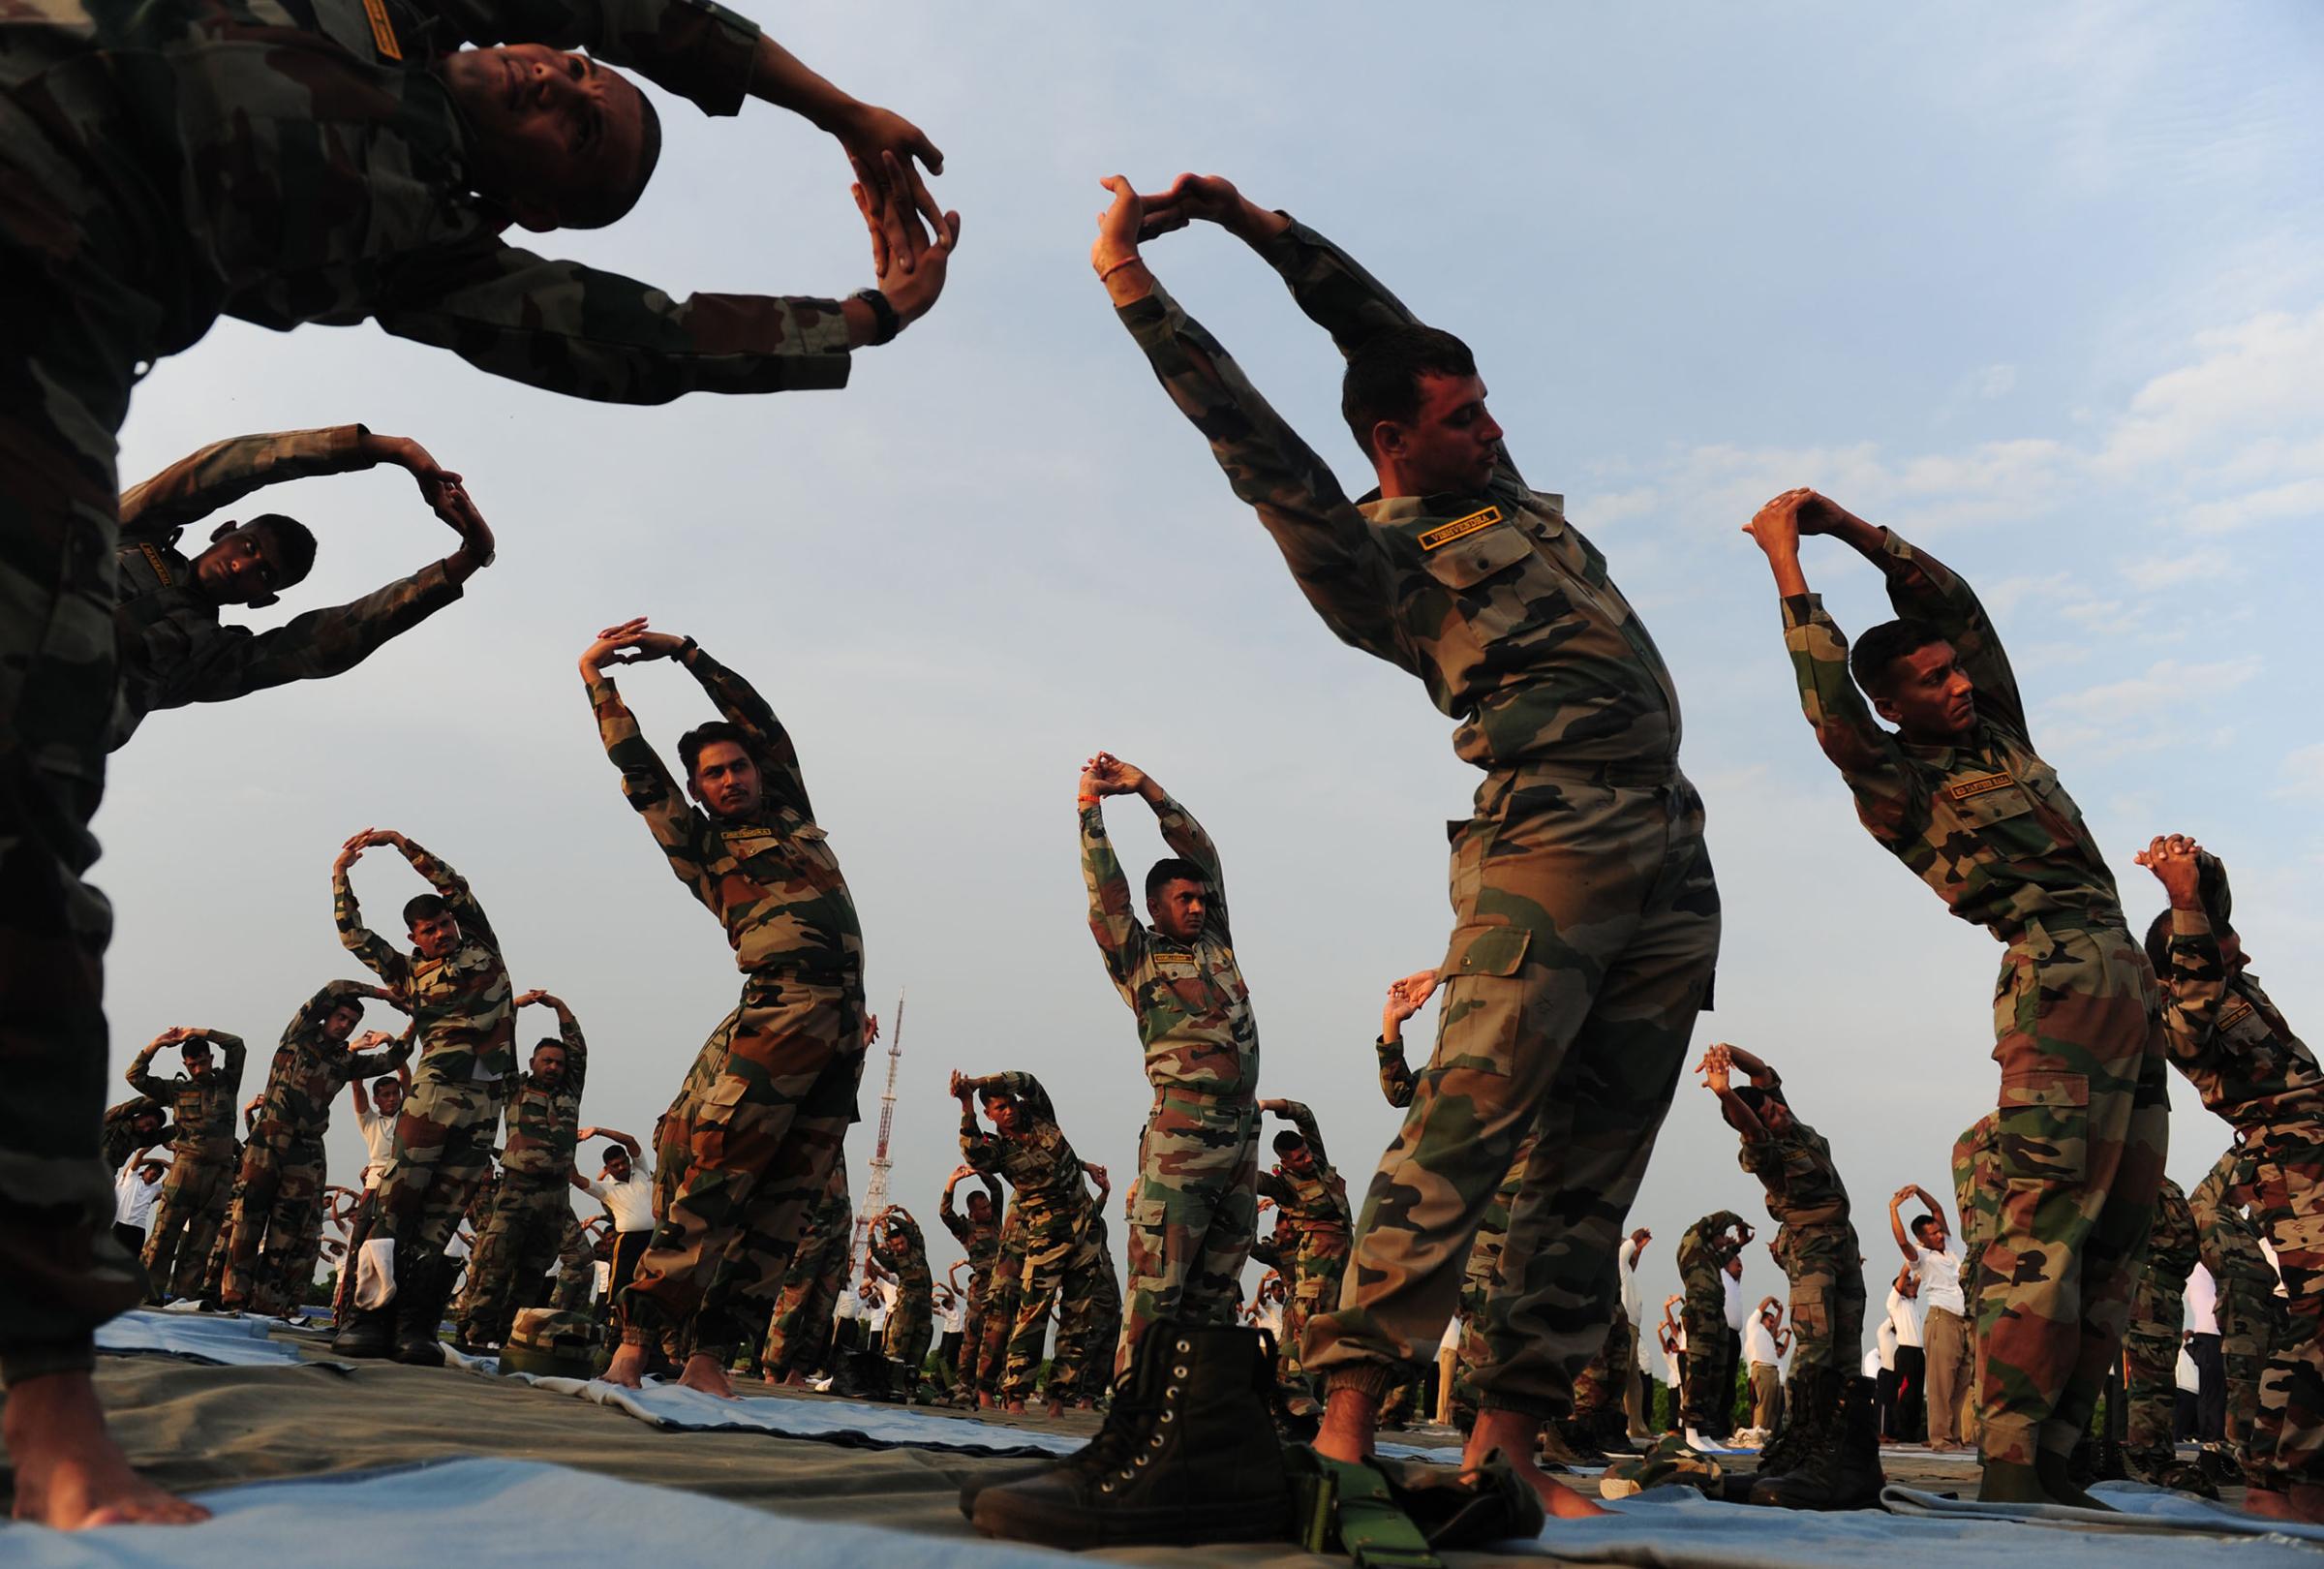 Indian Army soldiers participate in a yoga demonstration on International Yoga Day in Chennai, India, on June 21, 2016.